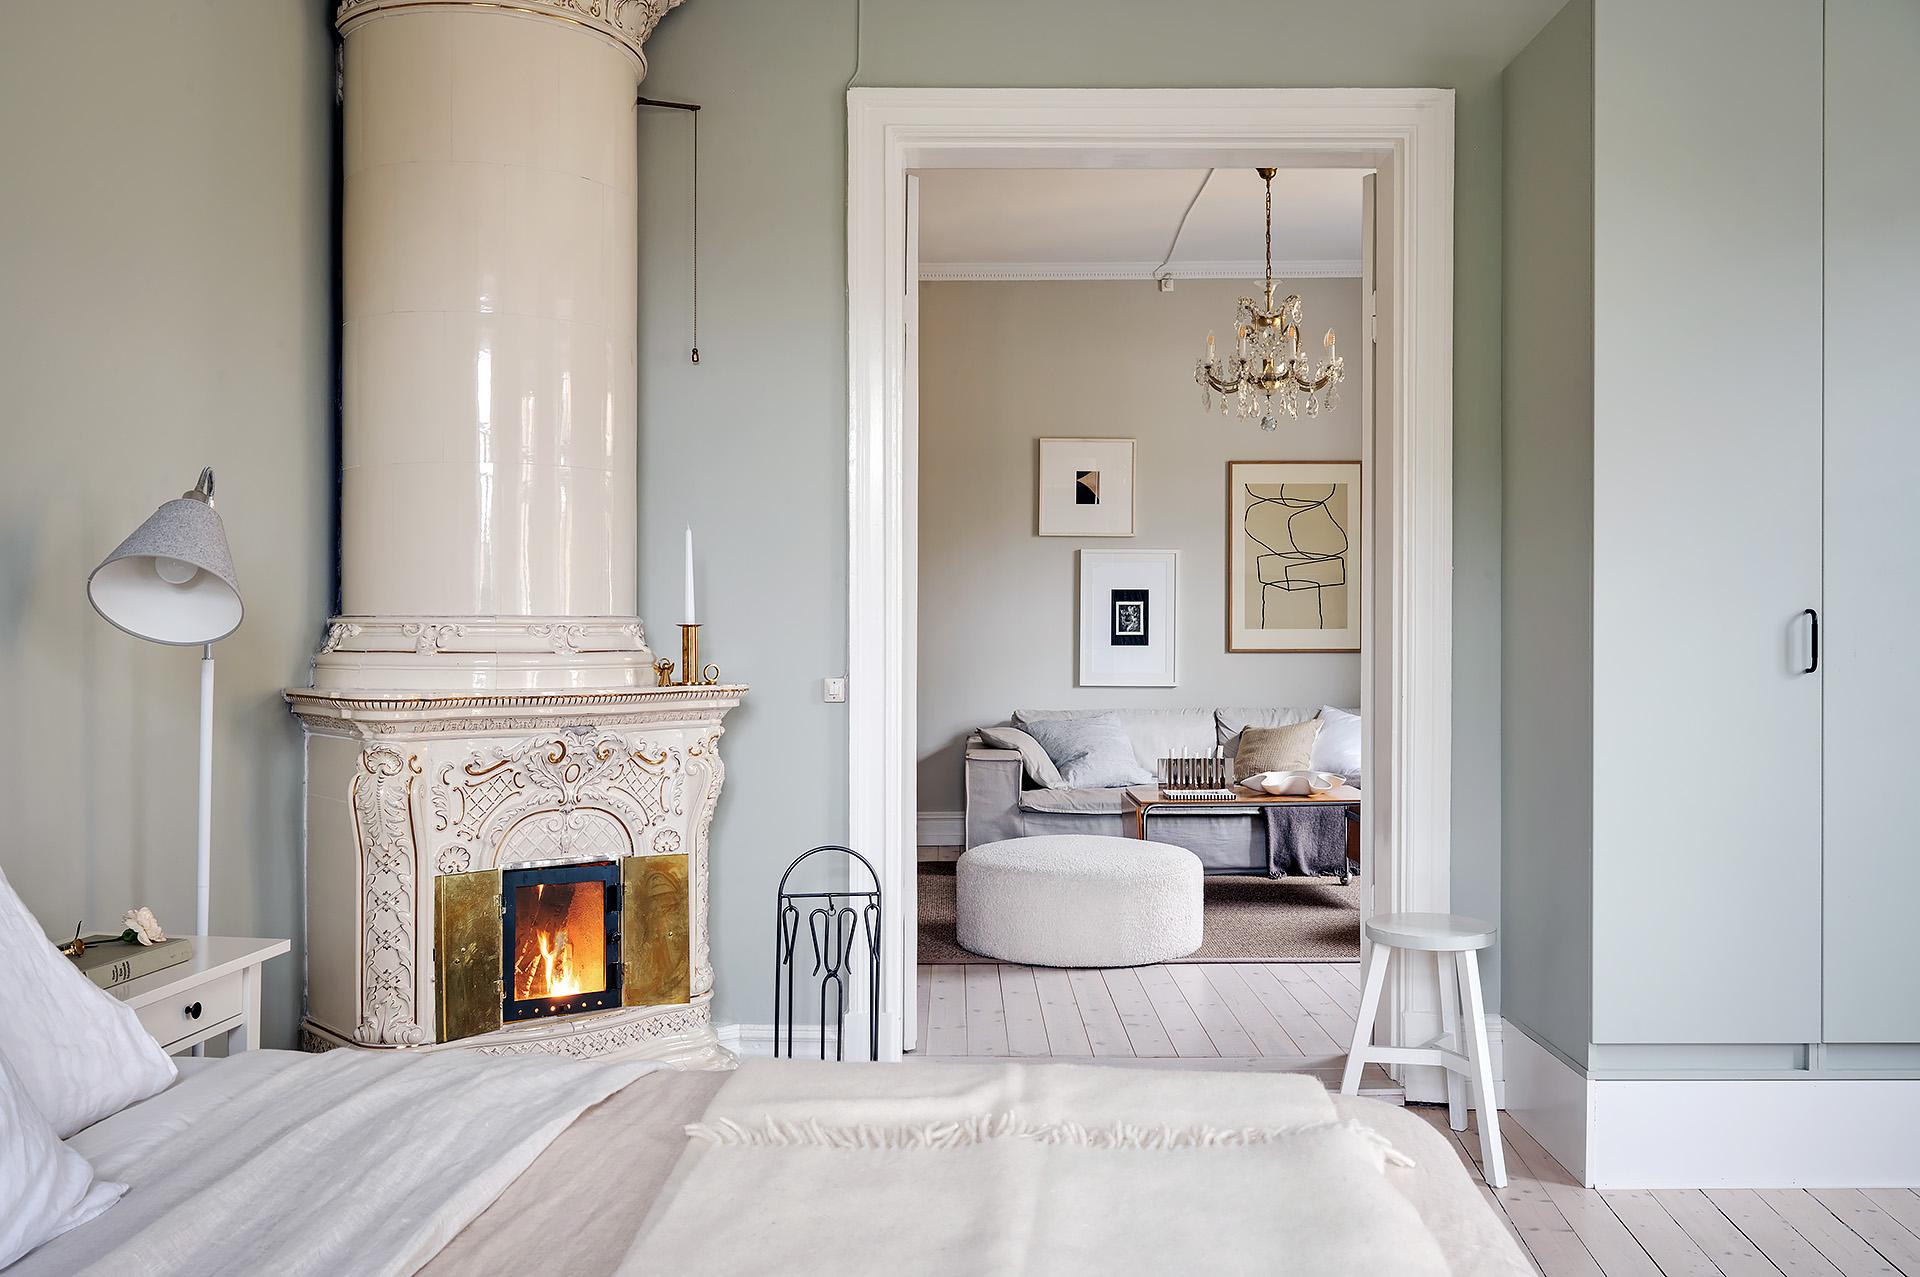 https://cocolapinedesign.com/wp-content/uploads/Sage-green-and-beige-walls-combined-in-a-historic-Swedish-apartment1.jpg